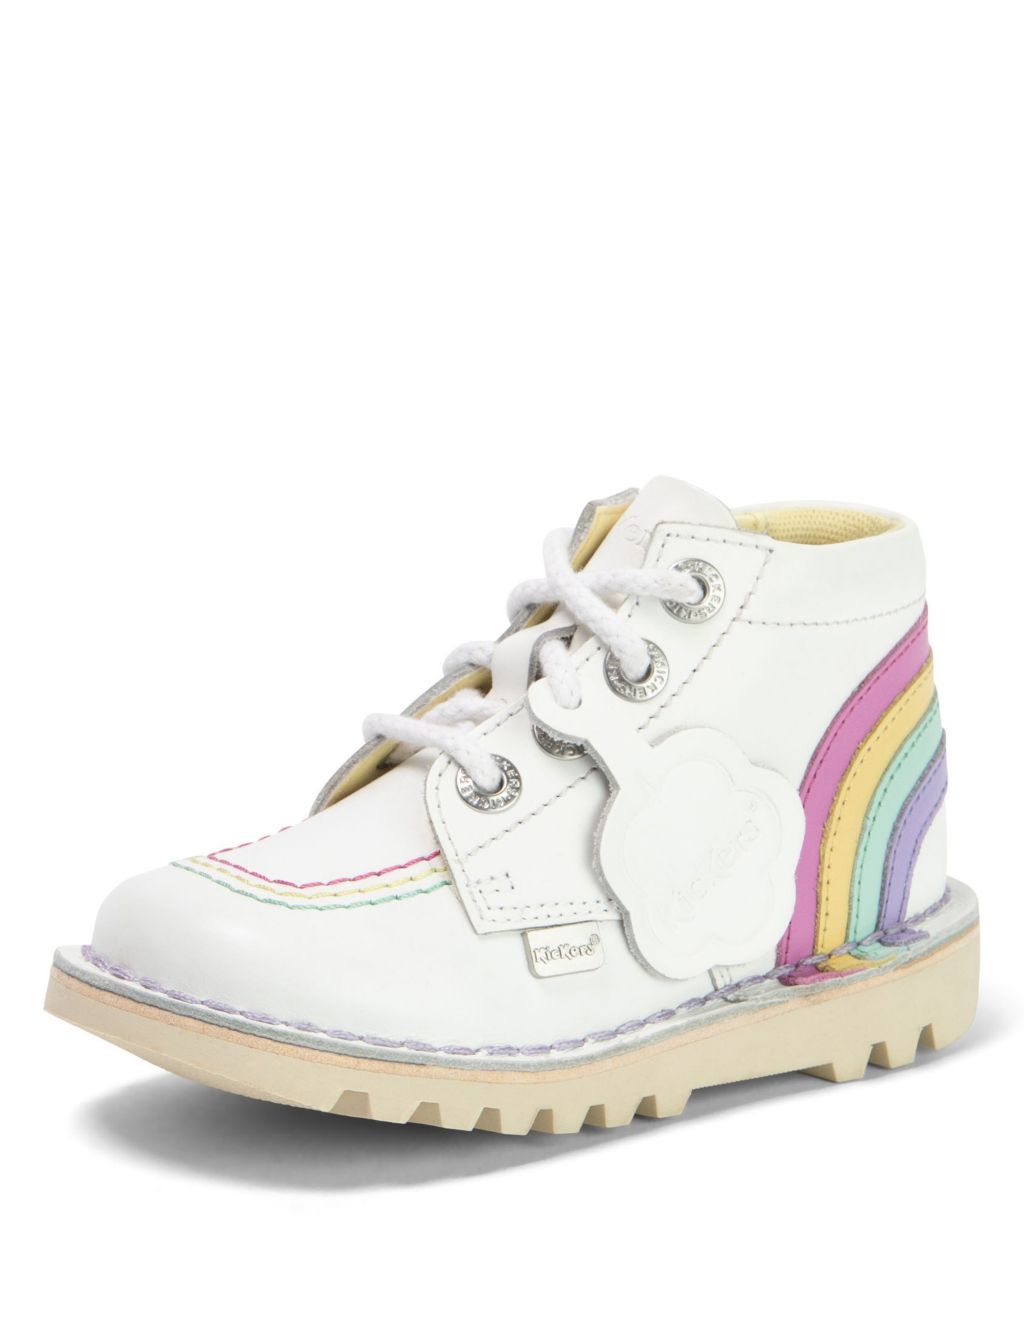 Kids' Leather Rainbow Ankle Boots (7 Small - 12 Small) image 5